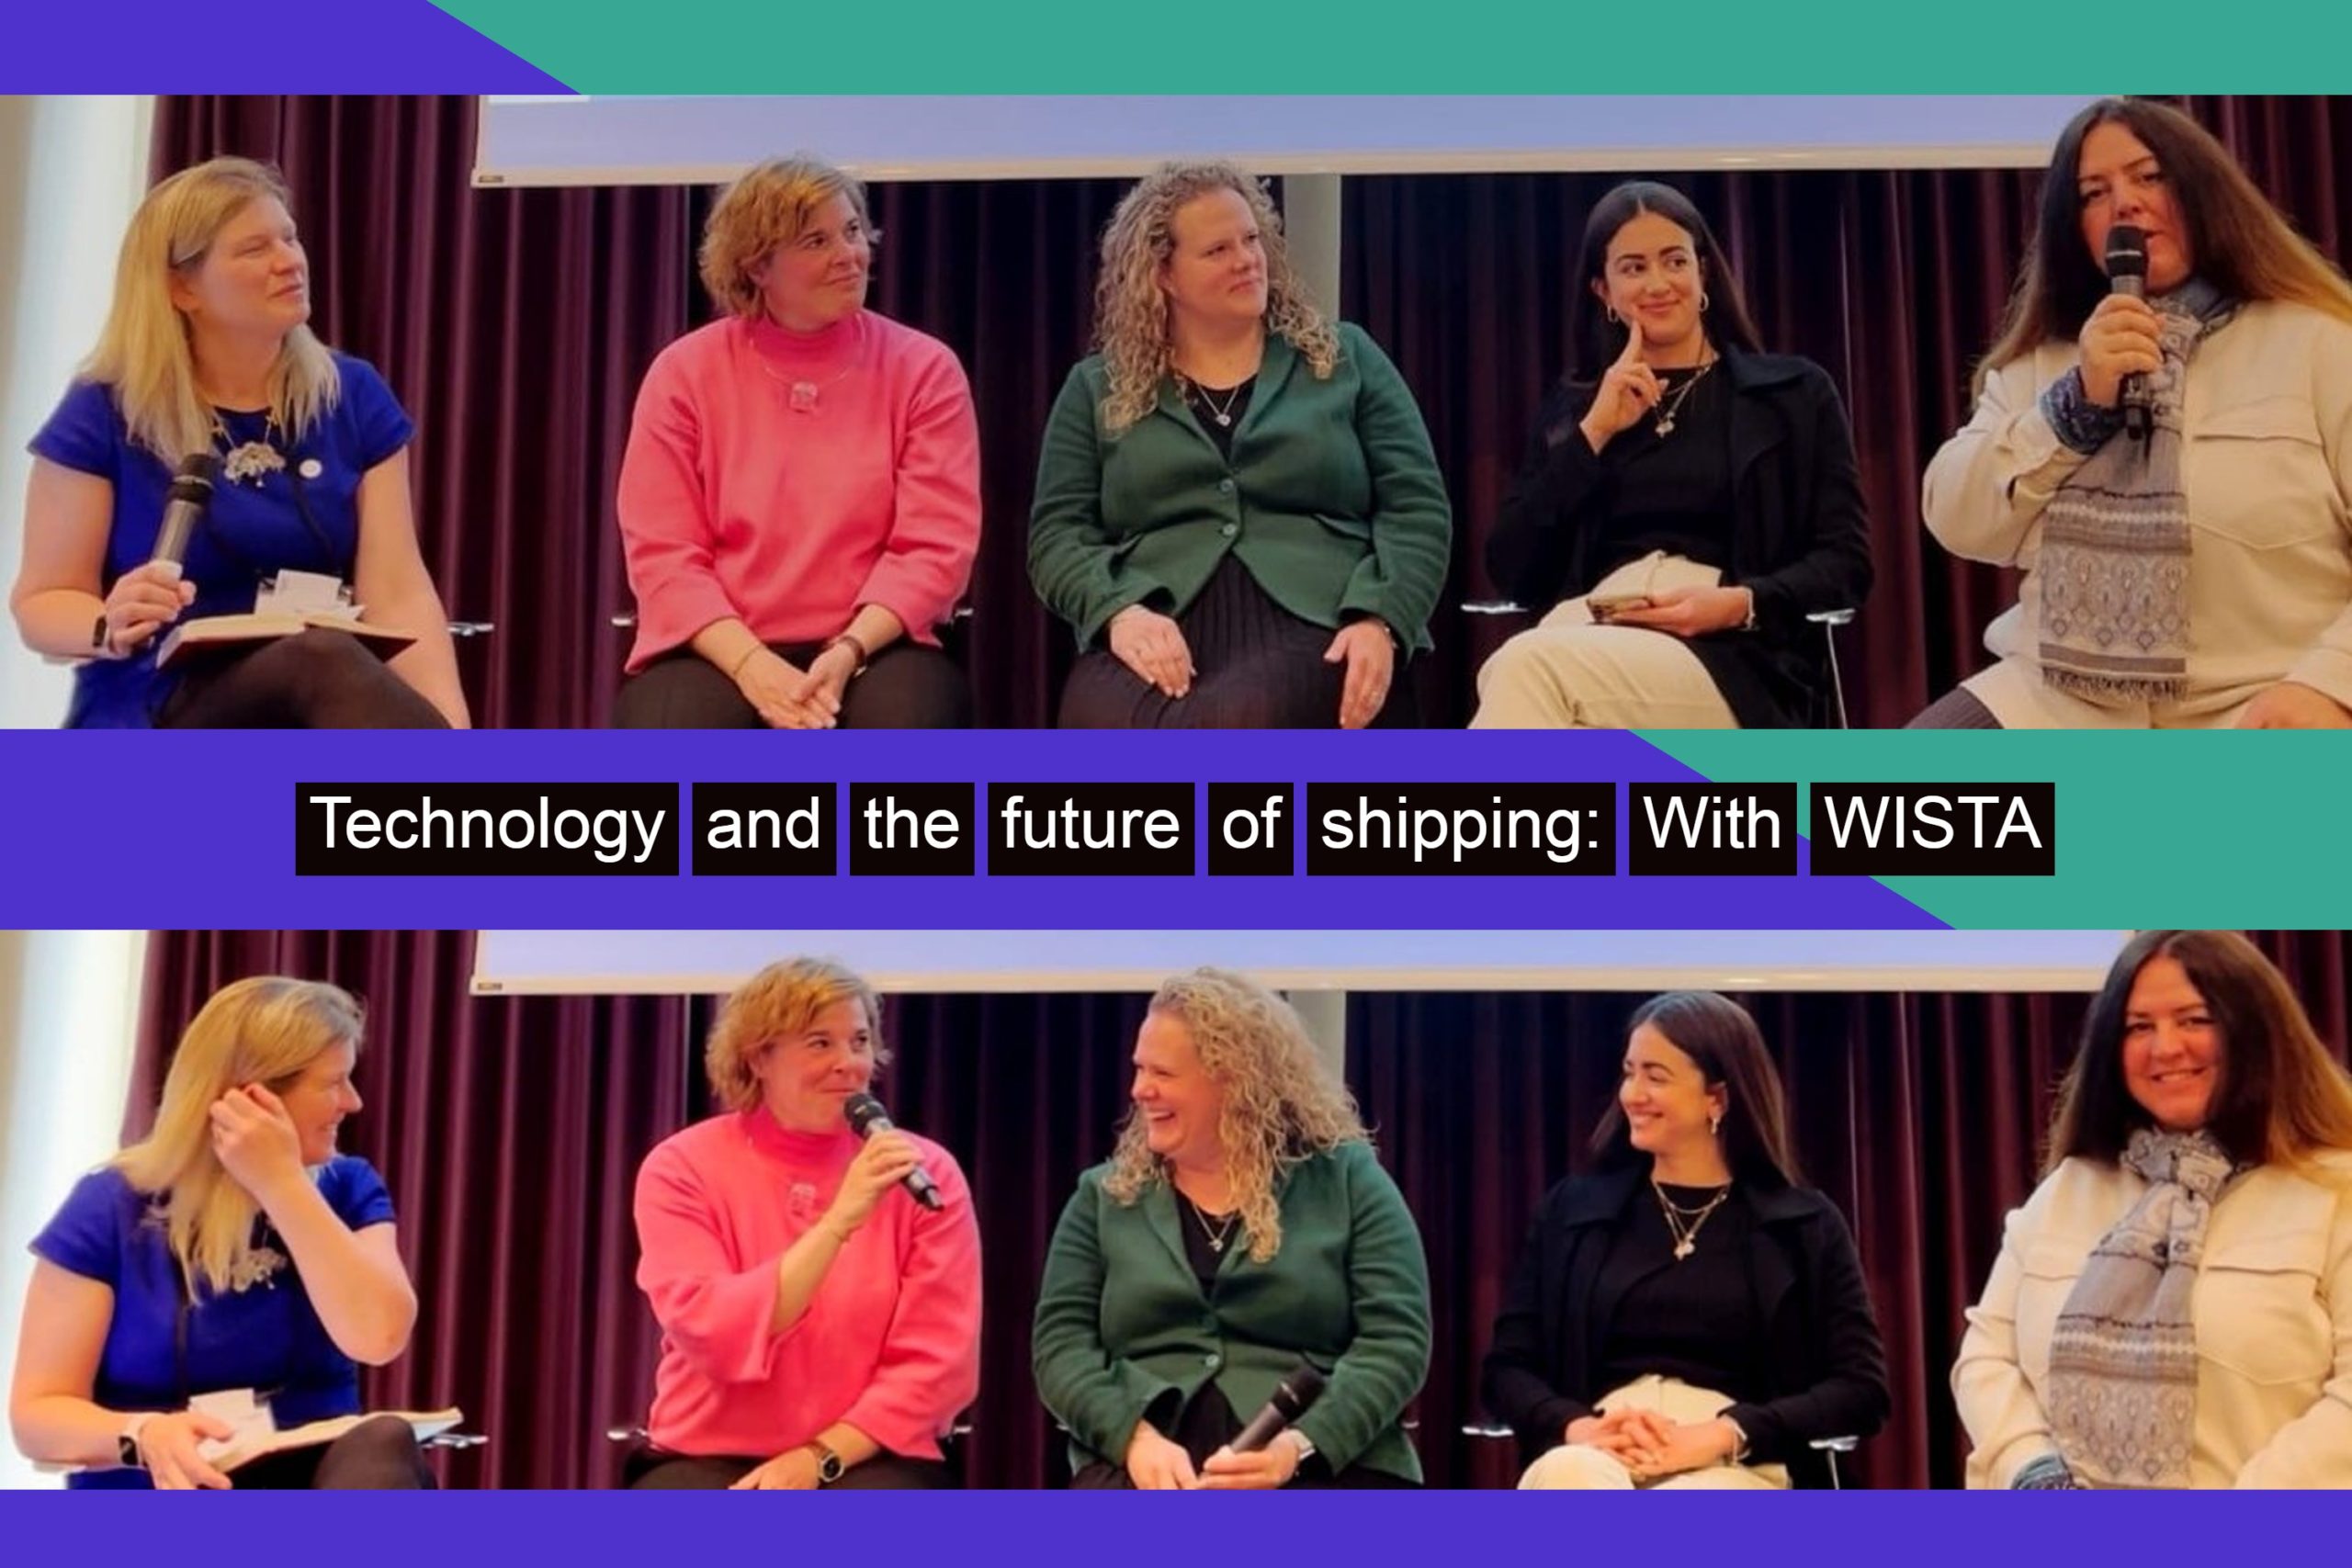 Aronnax: Technology and the future of shipping with WISTA